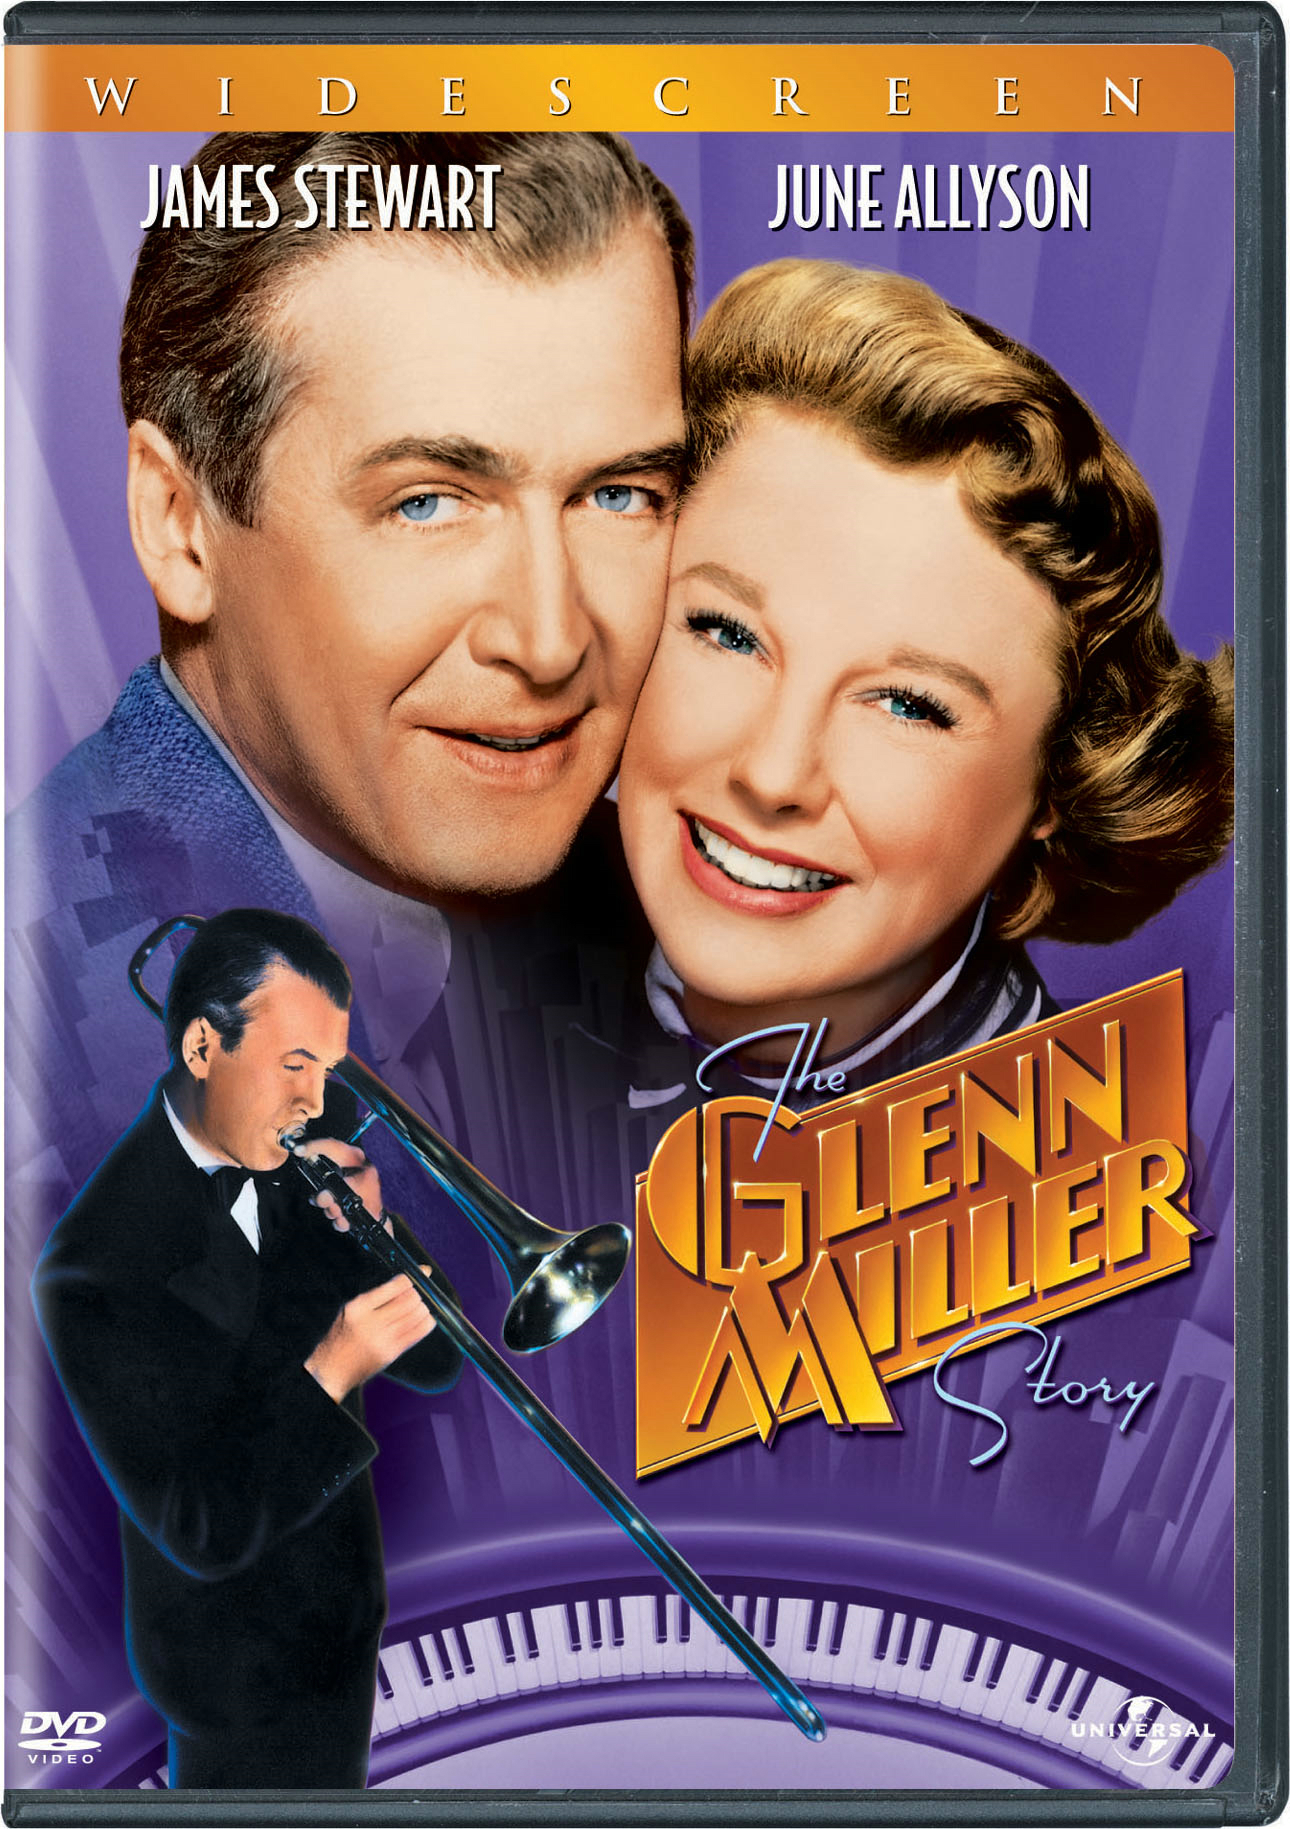 The Glenn Miller Story - DVD [ 1954 ]  - Classic Movies On DVD - Movies On GRUV